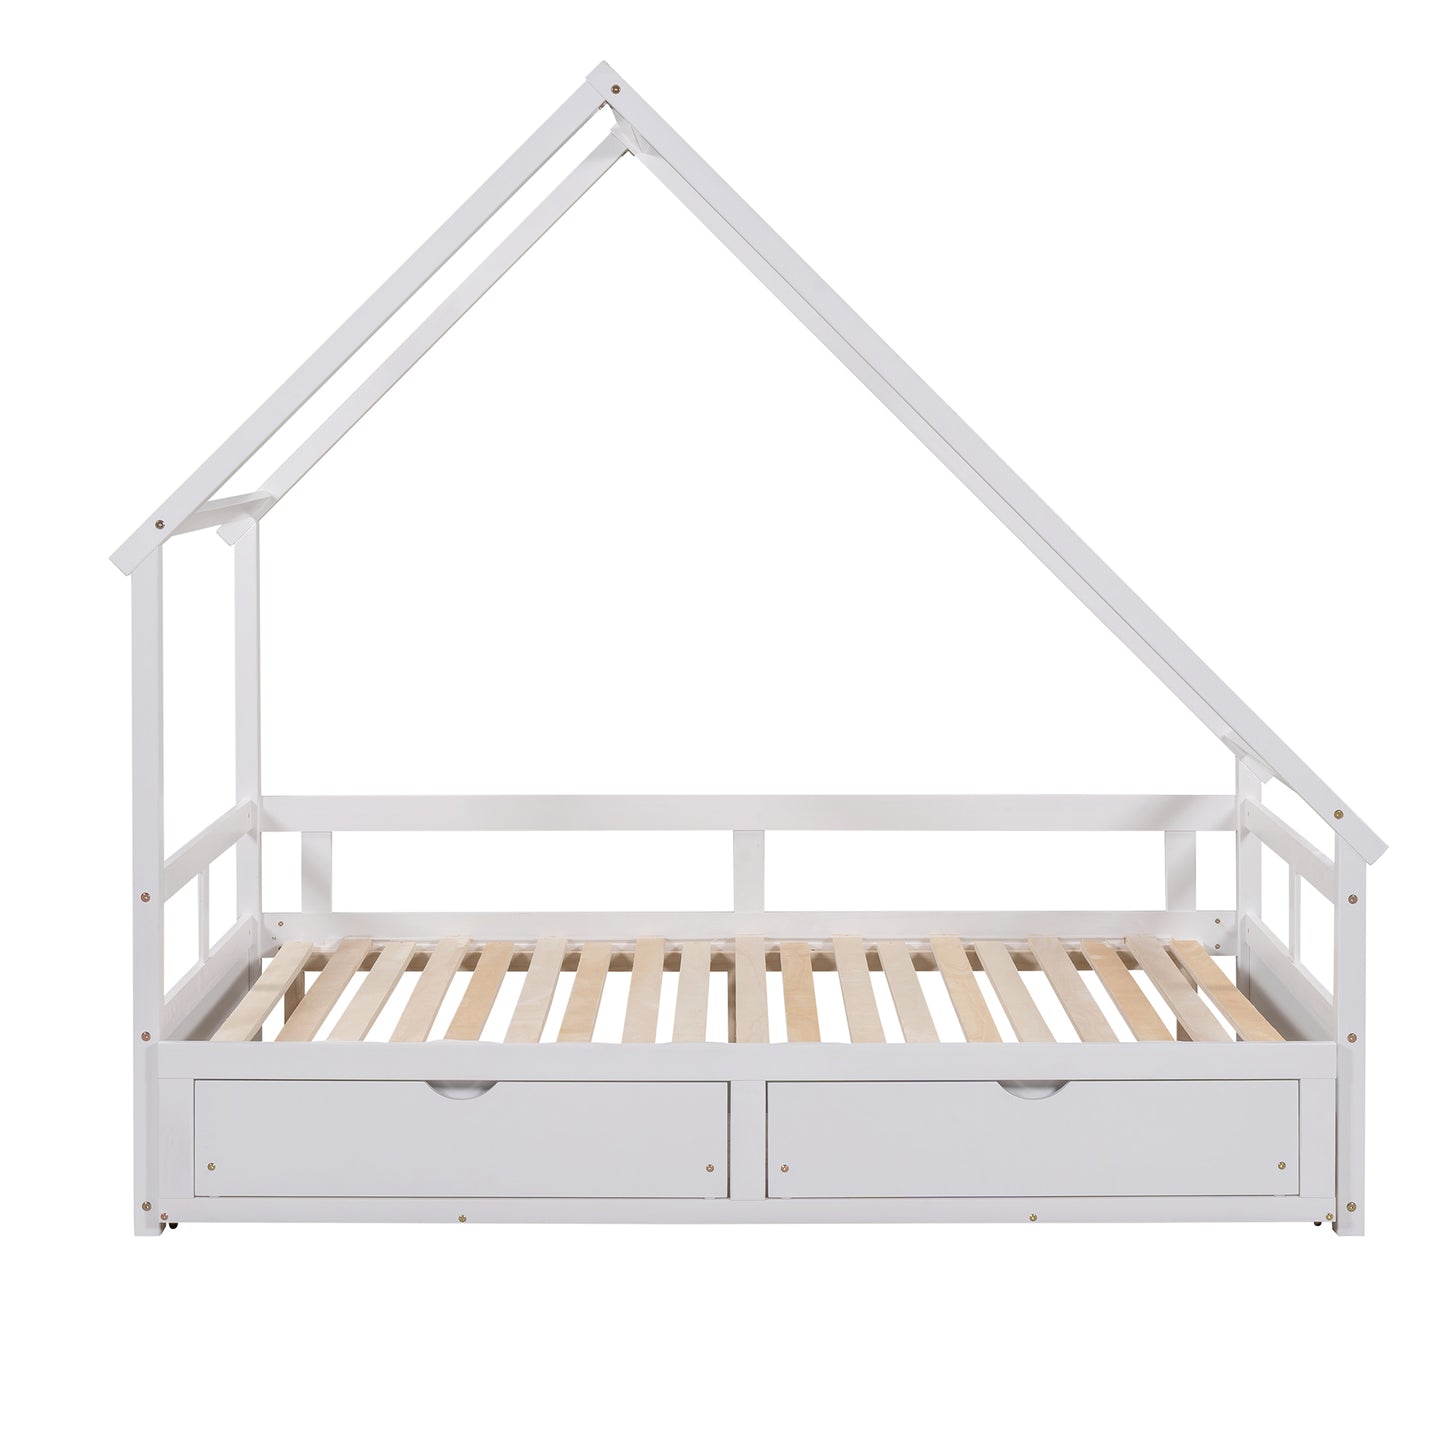 Extending Daybed with Two Drawers, Wooden House Bed with Drawers, White